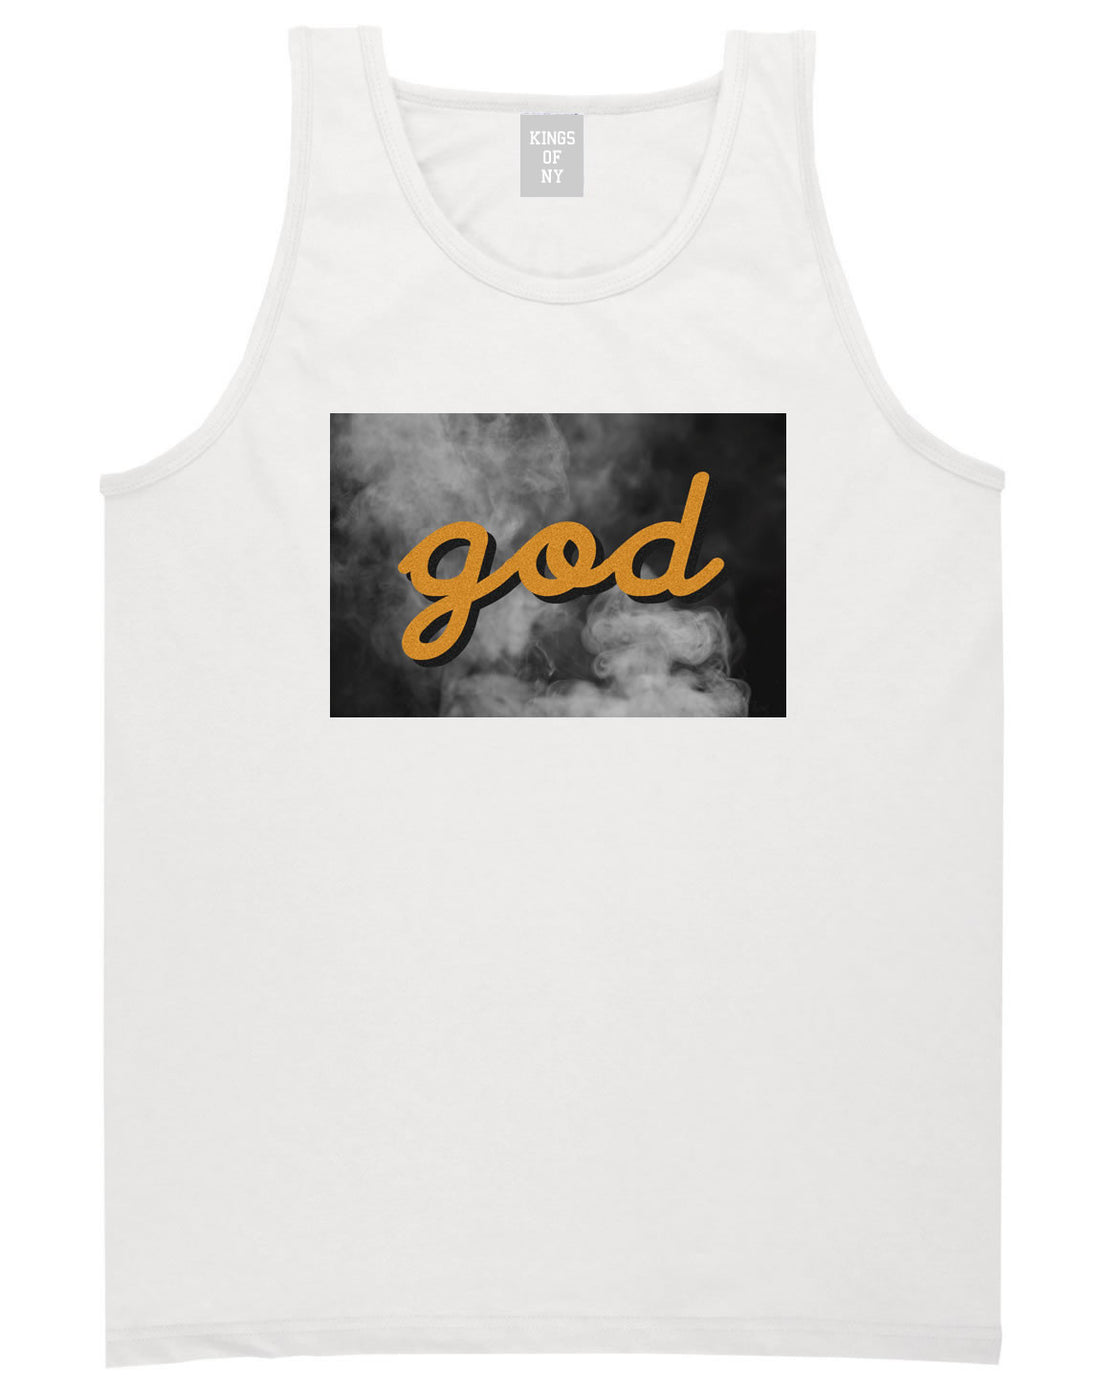 God Up In Smoke Puff Goth Dark Tank Top in White By Kings Of NY